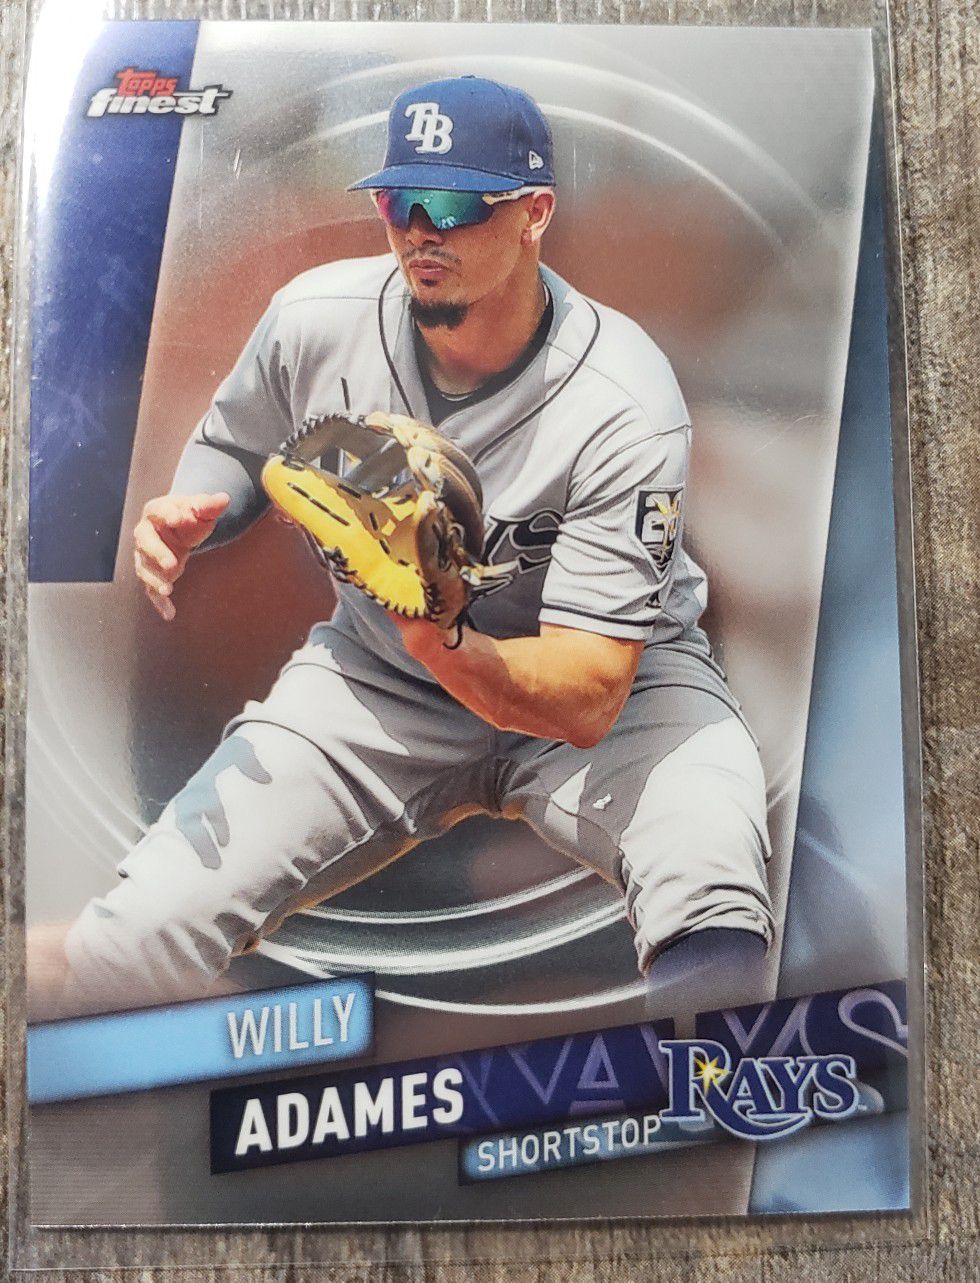 Willy Adames topps finest card